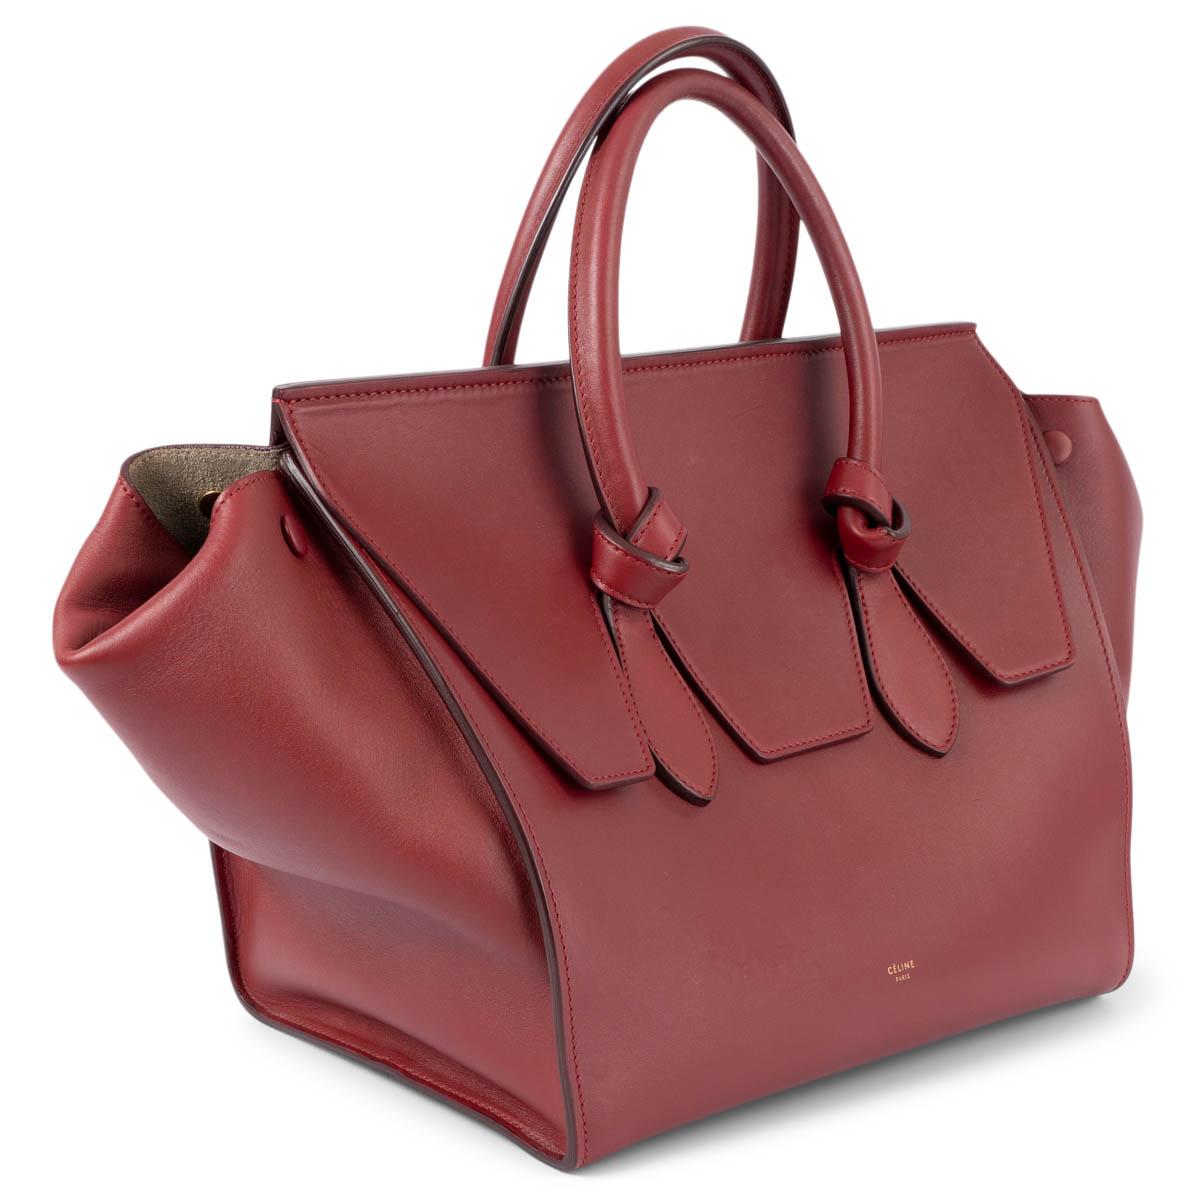 100% authentic Céline Small Tie bag in smooth burgundy calfskin and gold-tone hardware. The design features knotted handles and wide side gussets with strap closure. Lined in light grey suede with one zipper and two patch pockets against the back.